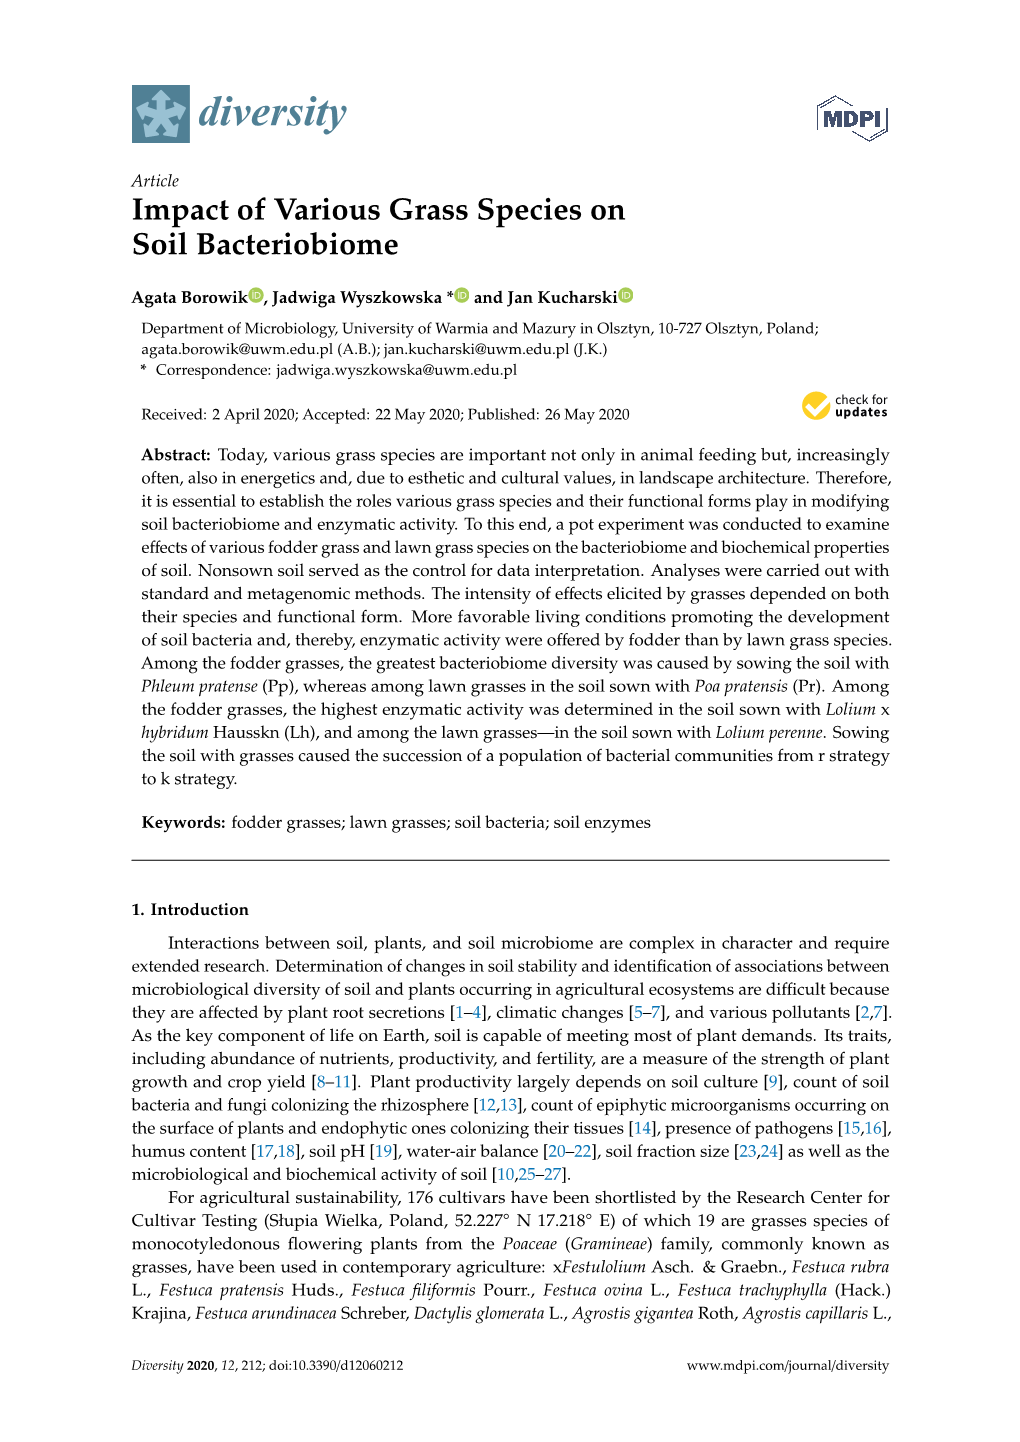 Impact of Various Grass Species on Soil Bacteriobiome